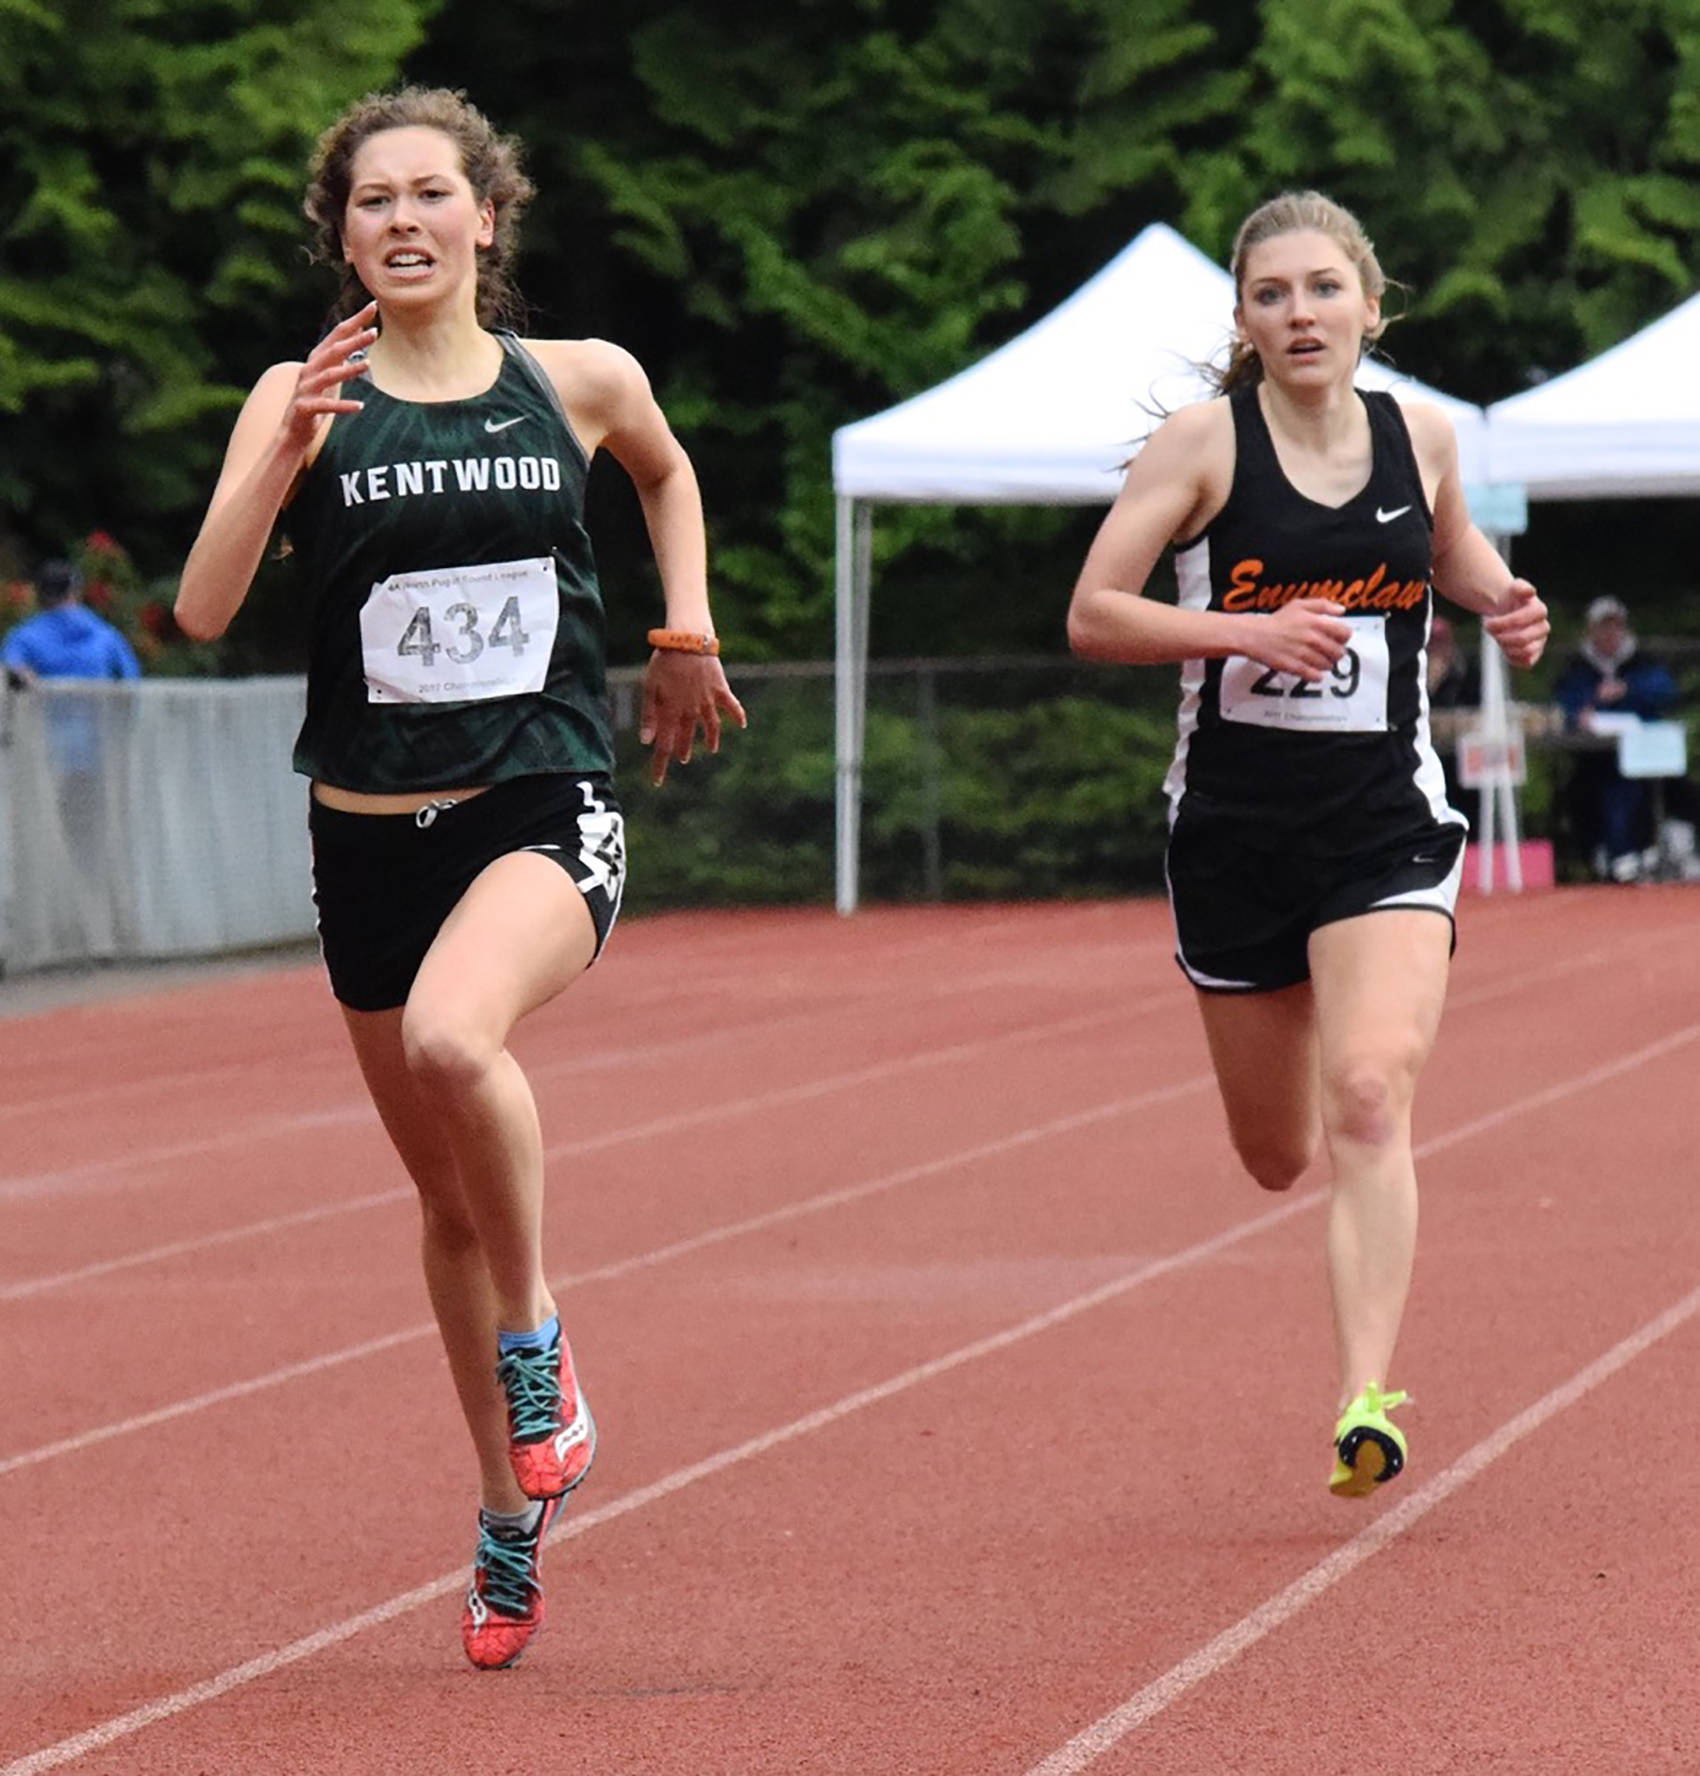 Kentwood’s Nicole Soleim dashes to victory in the 3,200 meters in 11:14.63, a personal best. Enumclaw’s Hunter Storm finished second. RACHEL CIAMPI, Kent Reporter